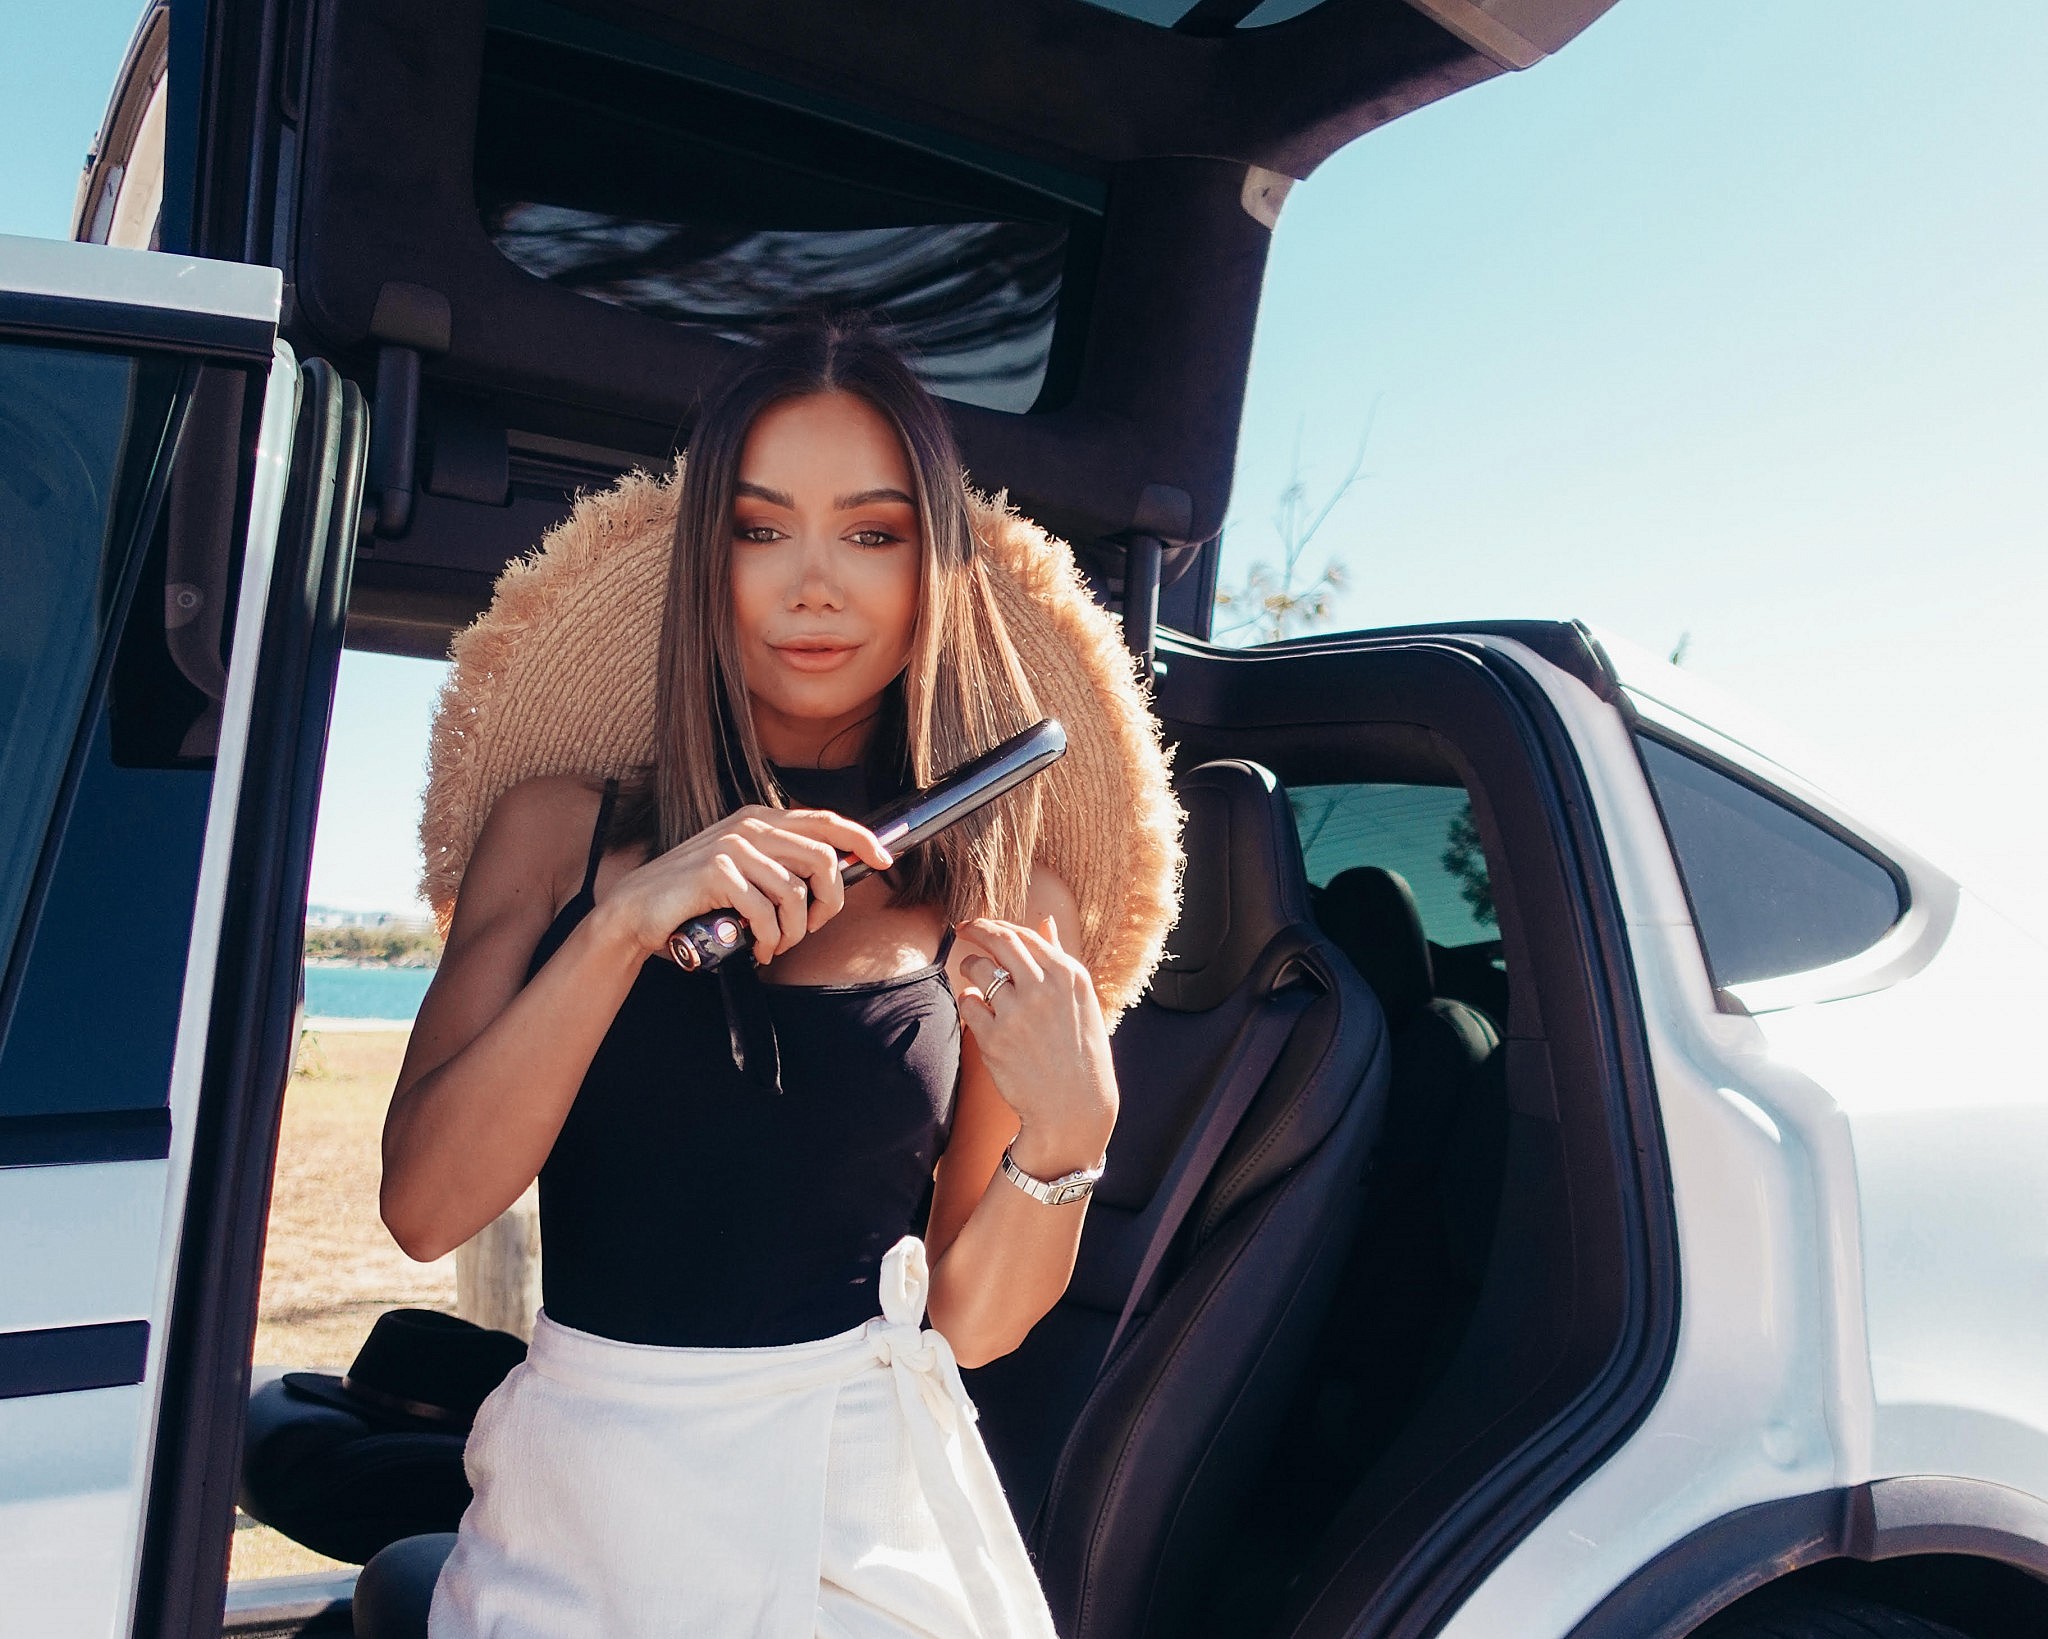 Lunch with Louis Vuitton - Kane and Pia Muehlenbeck